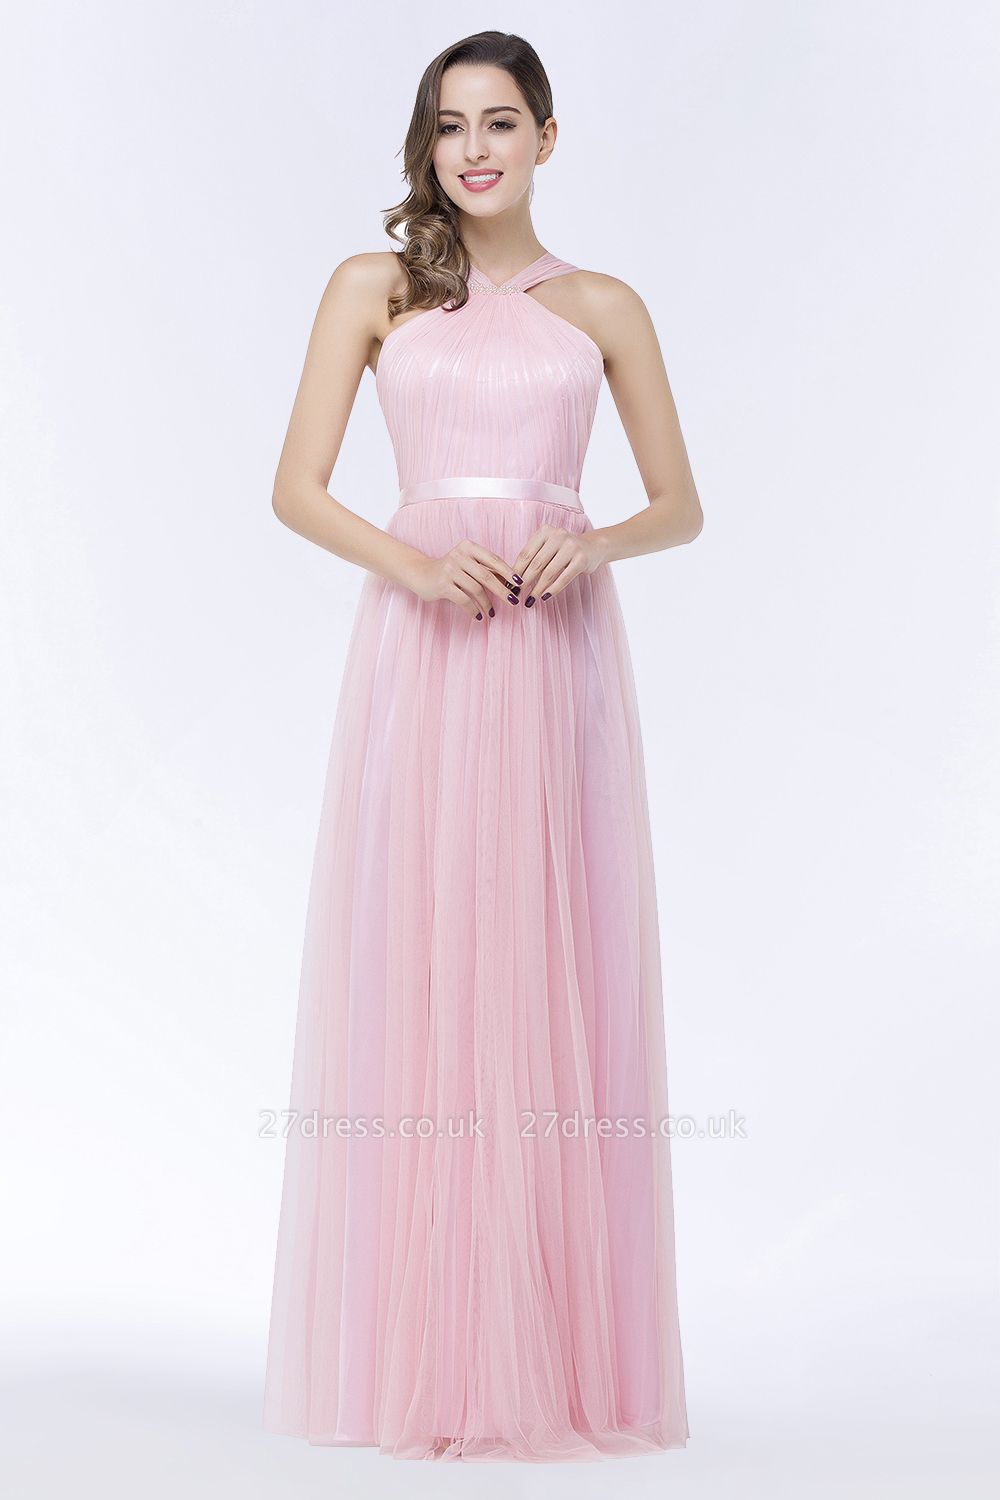 Amazing Halter Pink Tulle Bridesmaid Dress with Belt